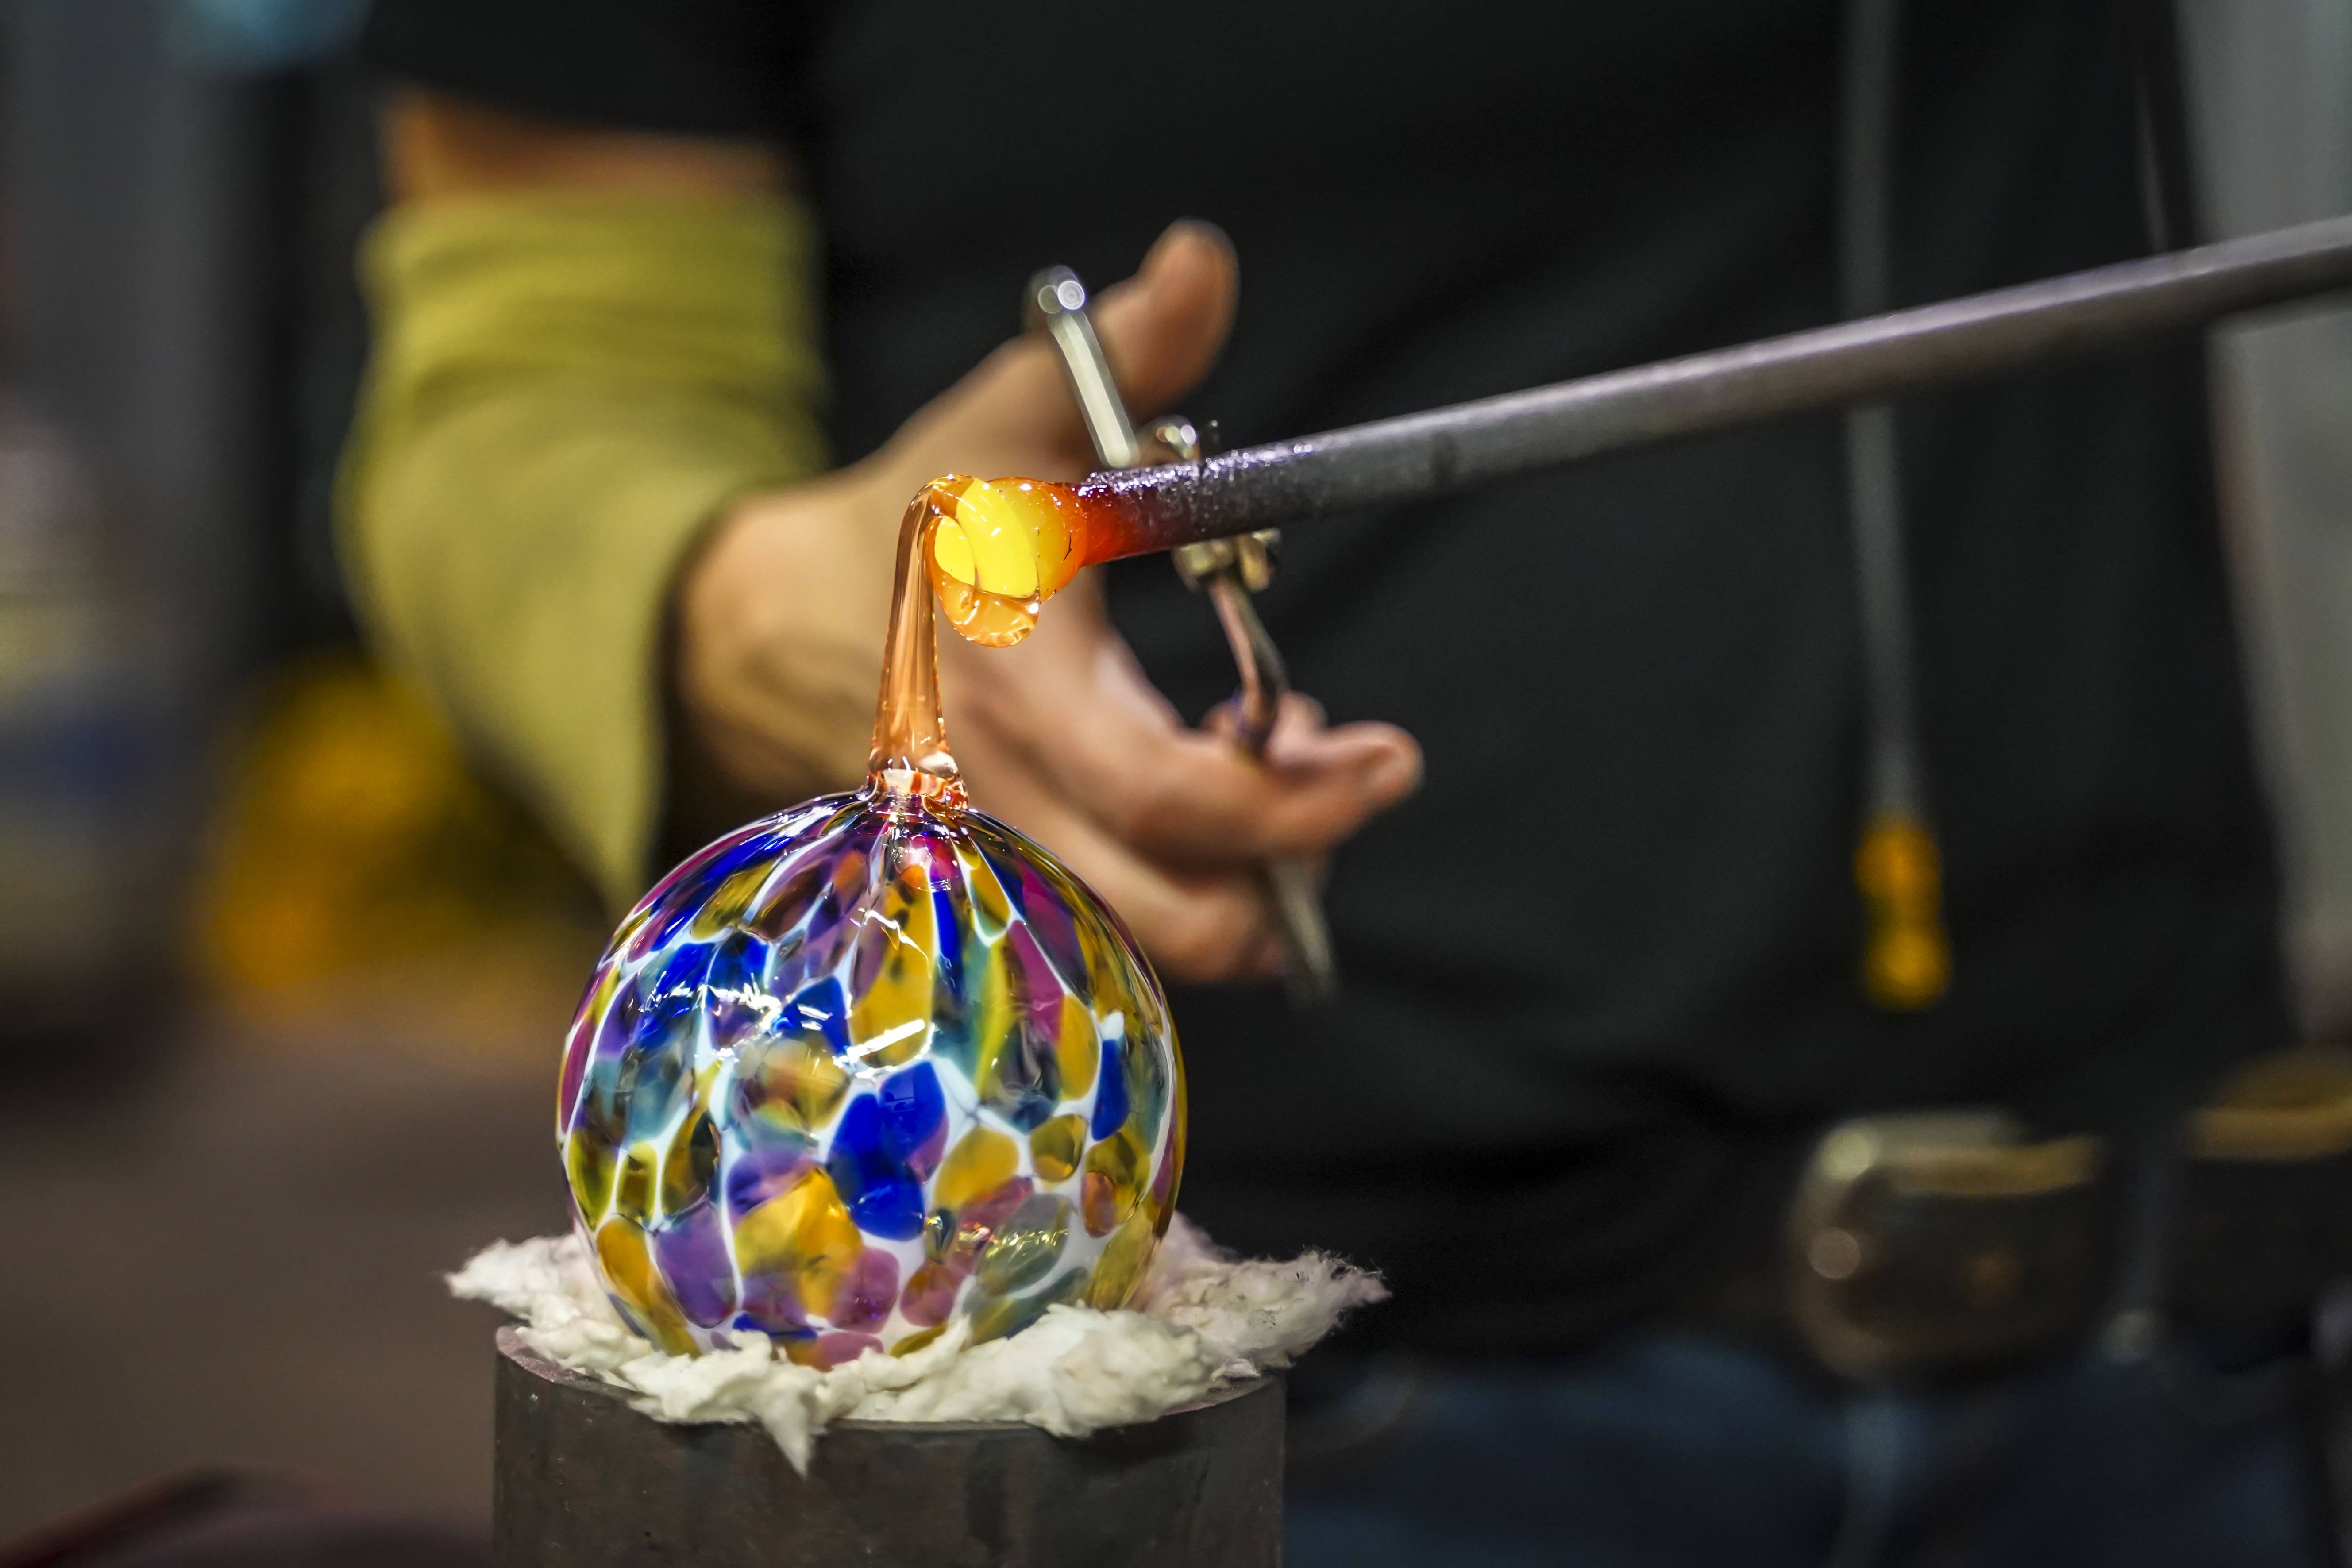 Glass Blowing - top and unique activity in Mallorca 2021/22